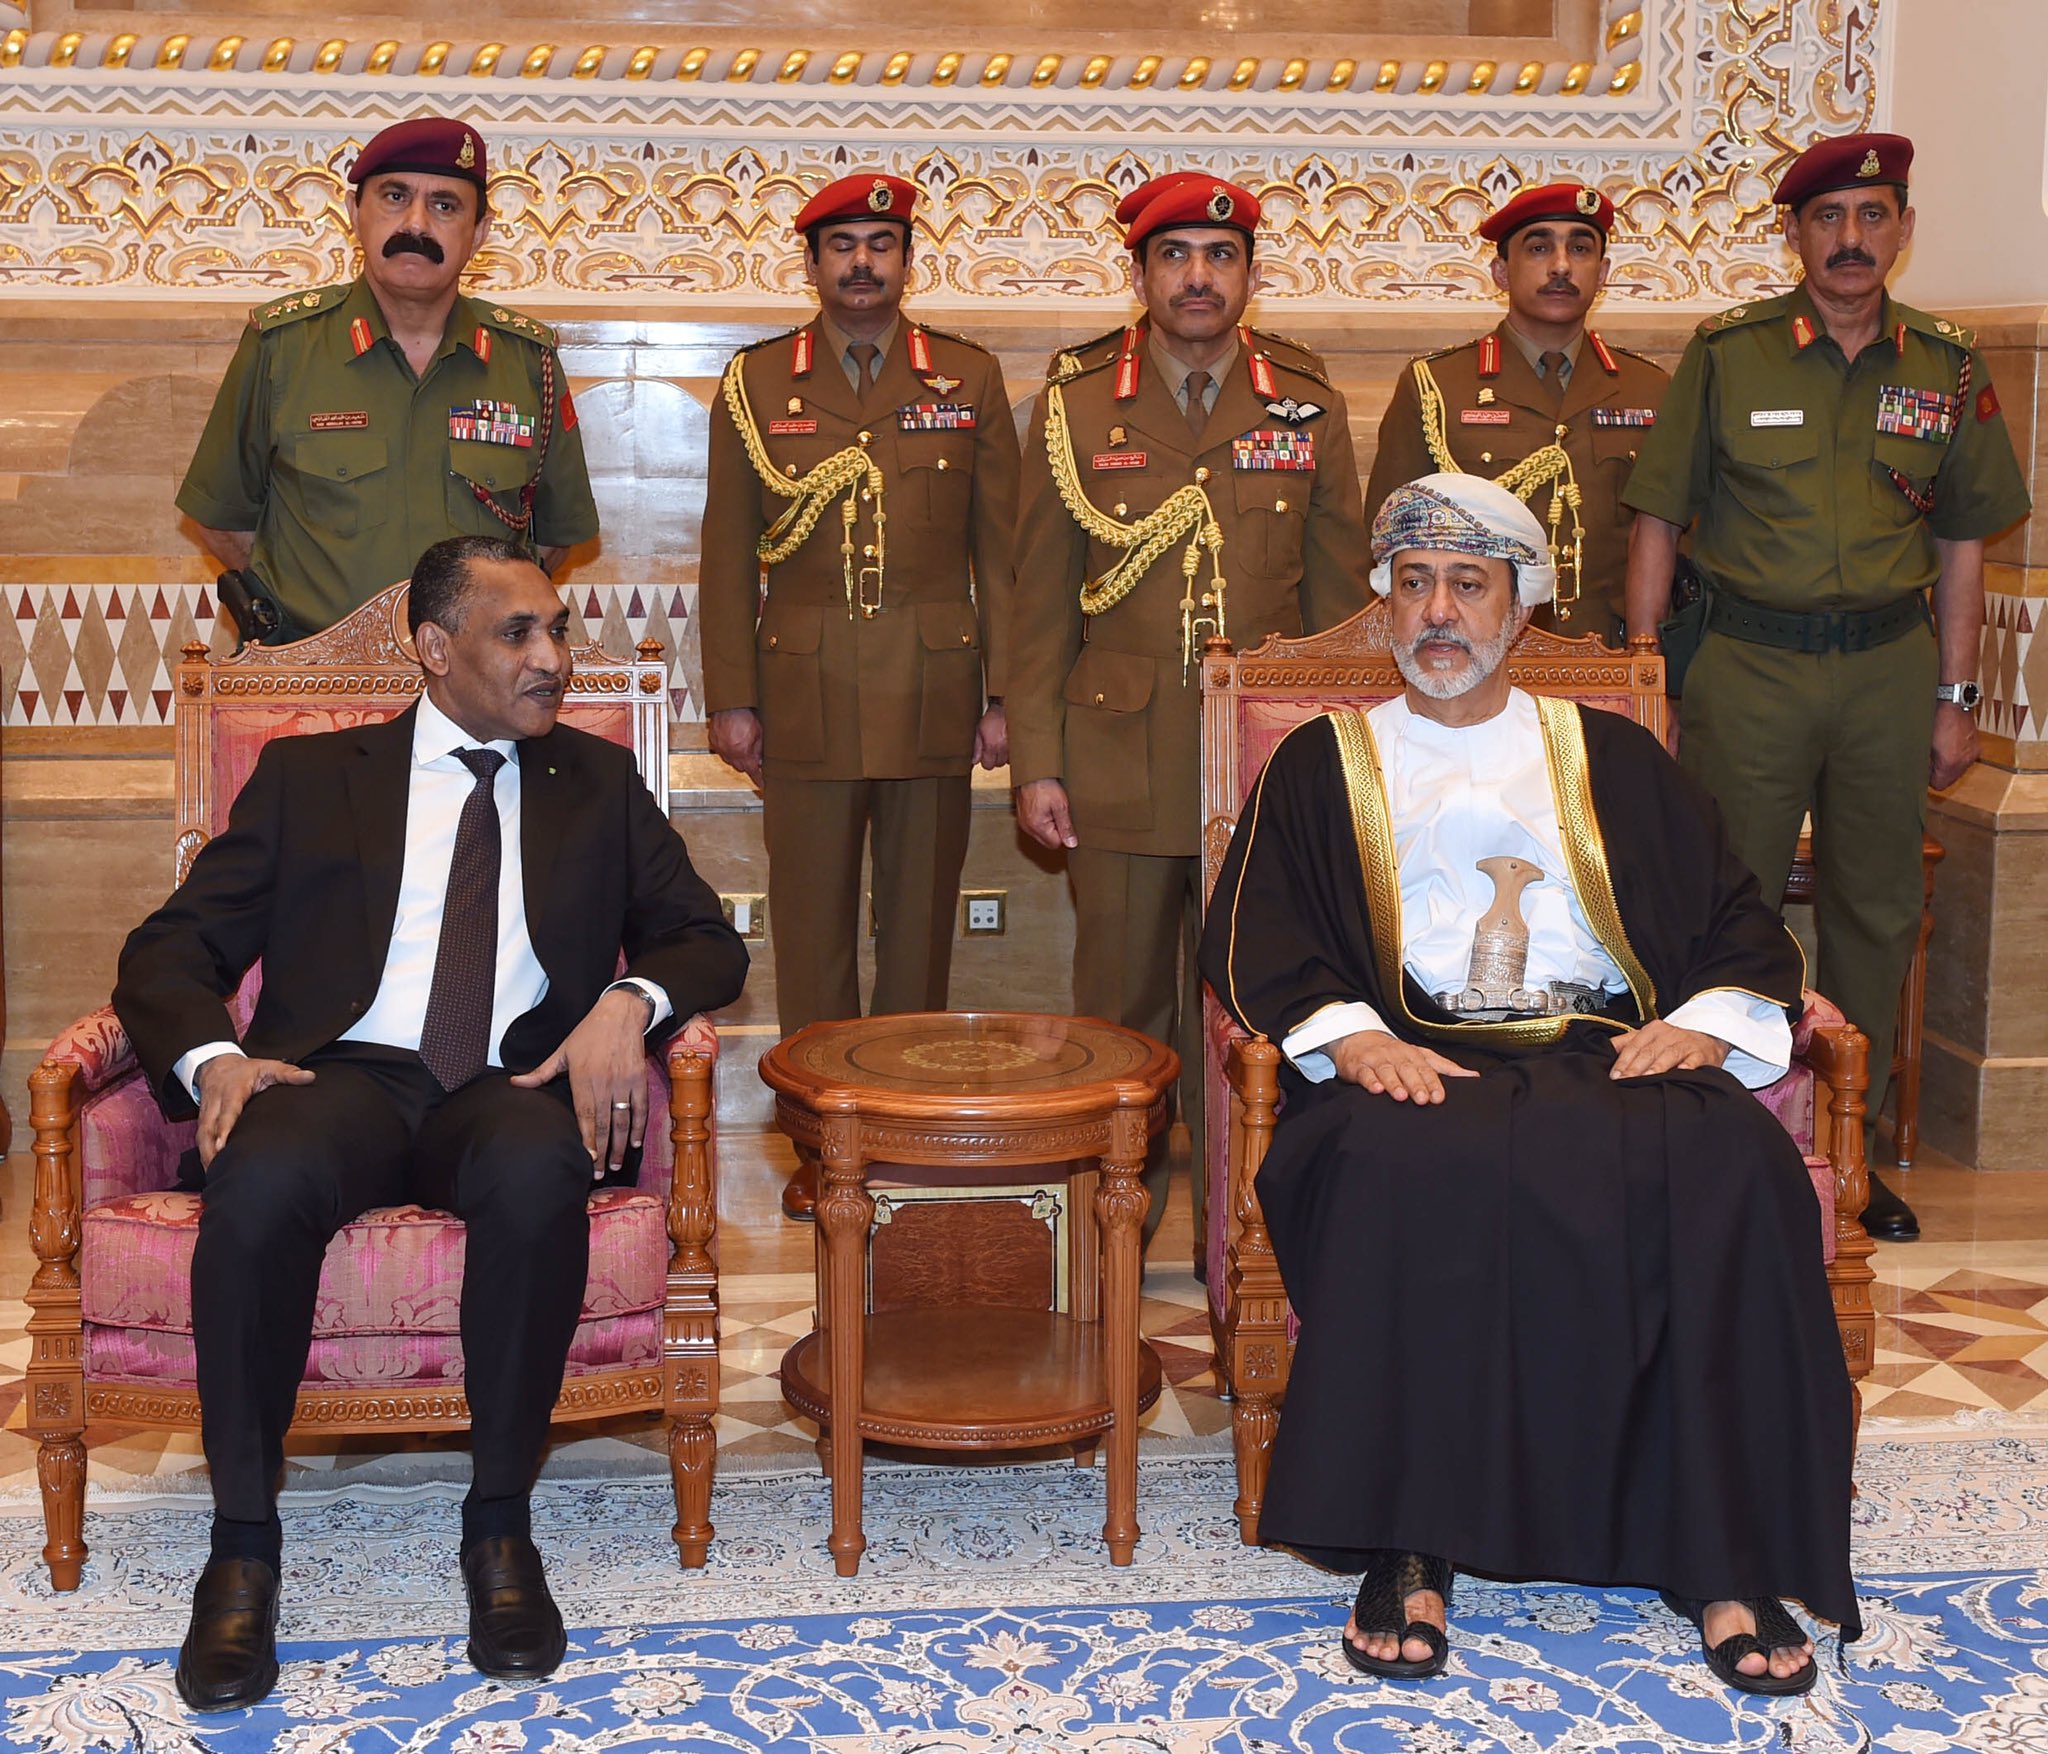 Mauritanian President condoles the passing of His Majesty Sultan Qaboos